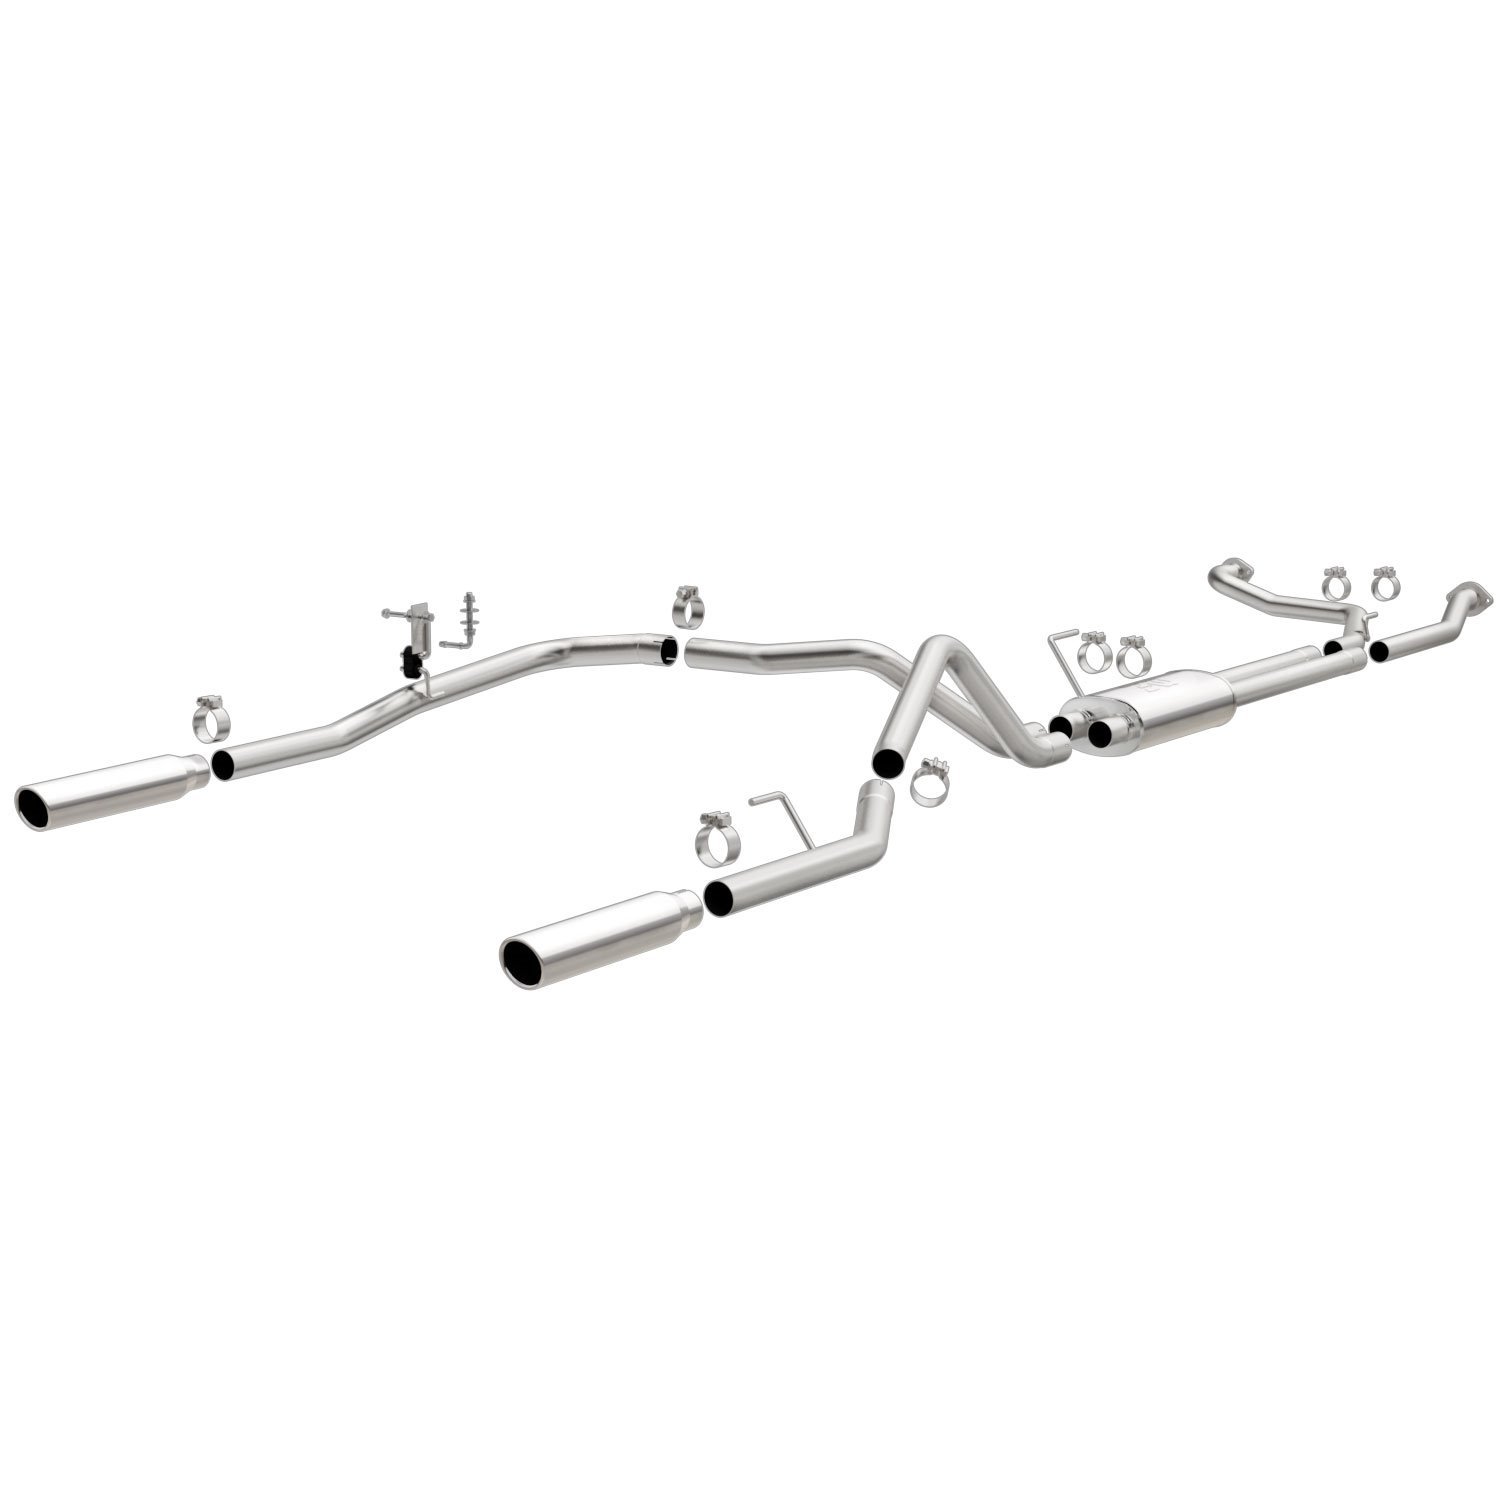 MF Series Cat-Back Exhaust System 2007-2015 for Nissan